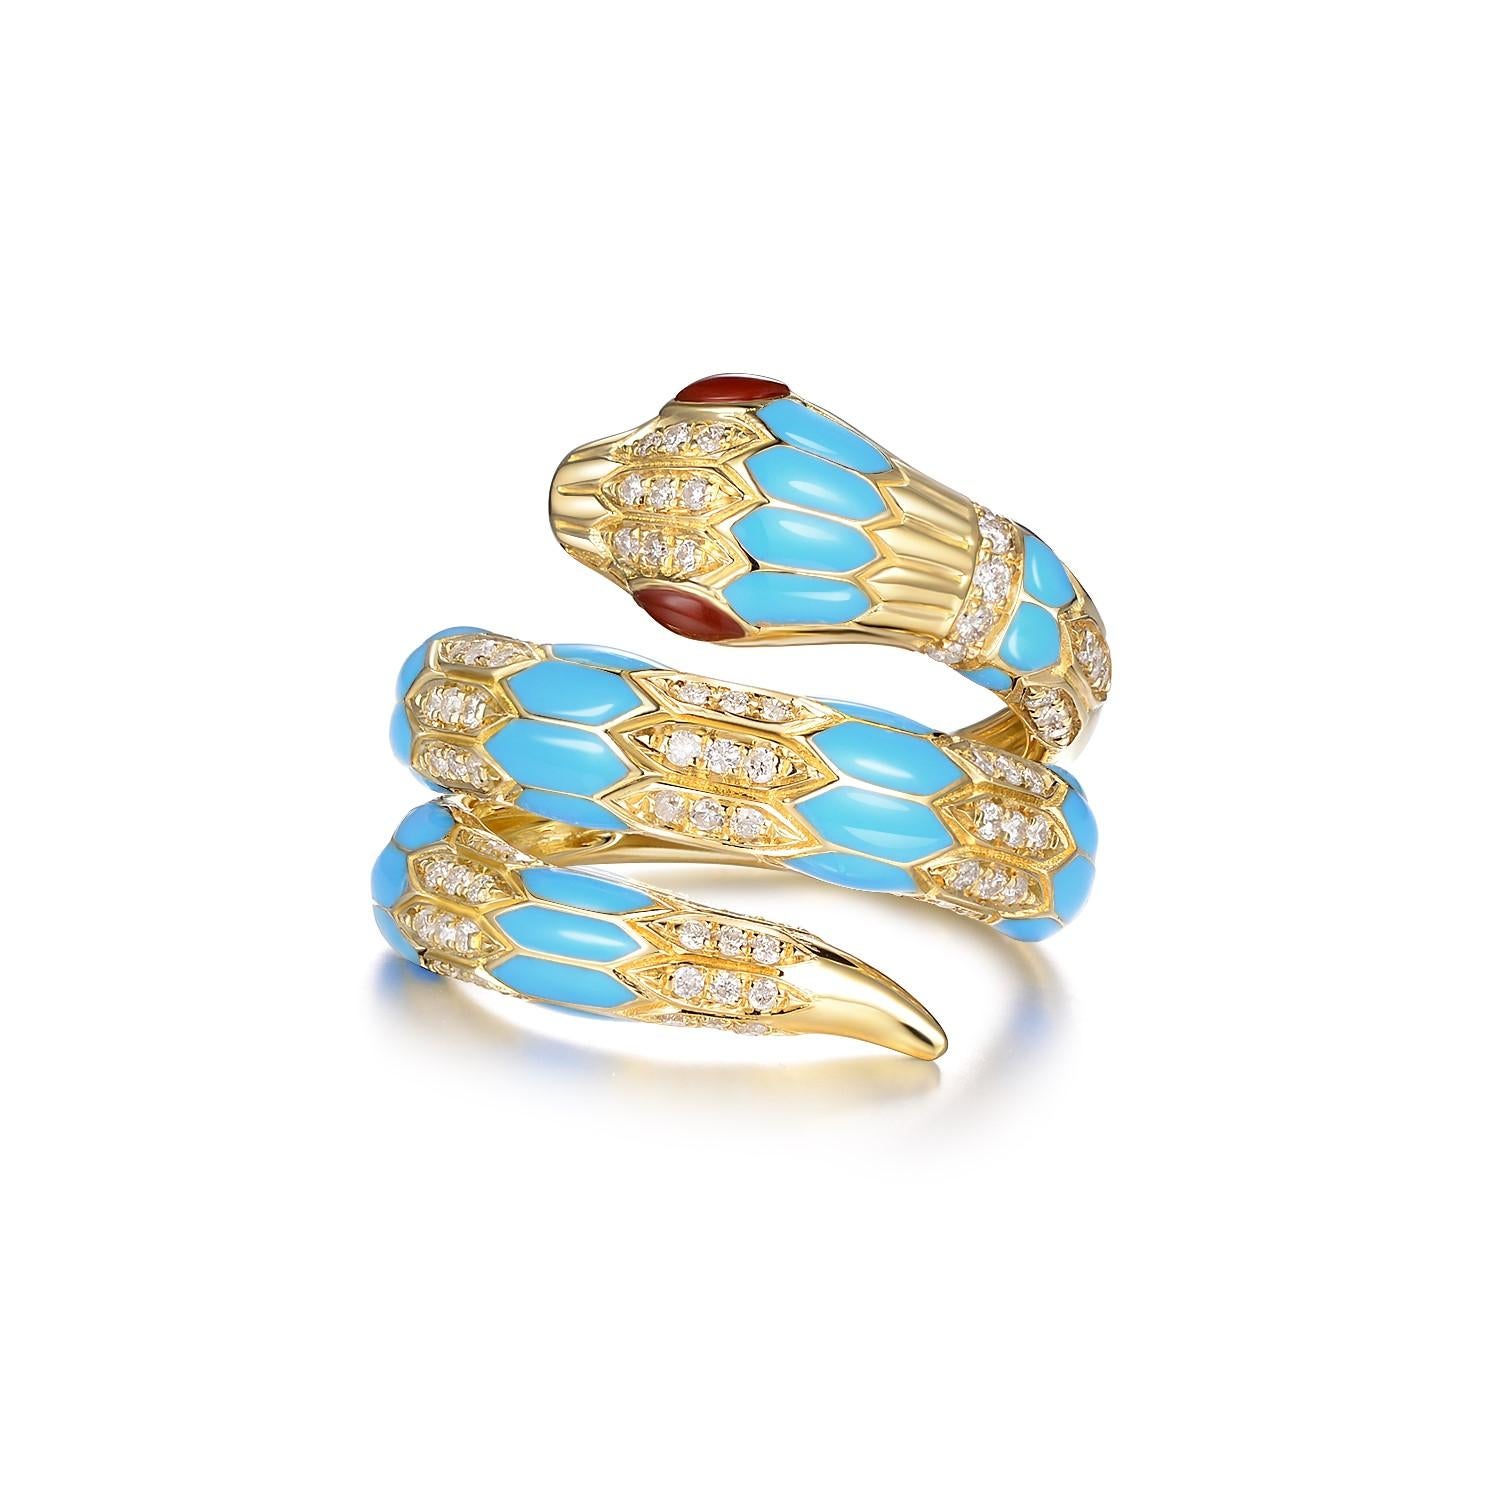 Introducing our stunning snake ring, a true statement piece that will leave you in awe. This exquisite ring features a sleek and elegant snake design, with a body that is covered in a beautiful turquoise-colored enamel. The enamel adds a touch of